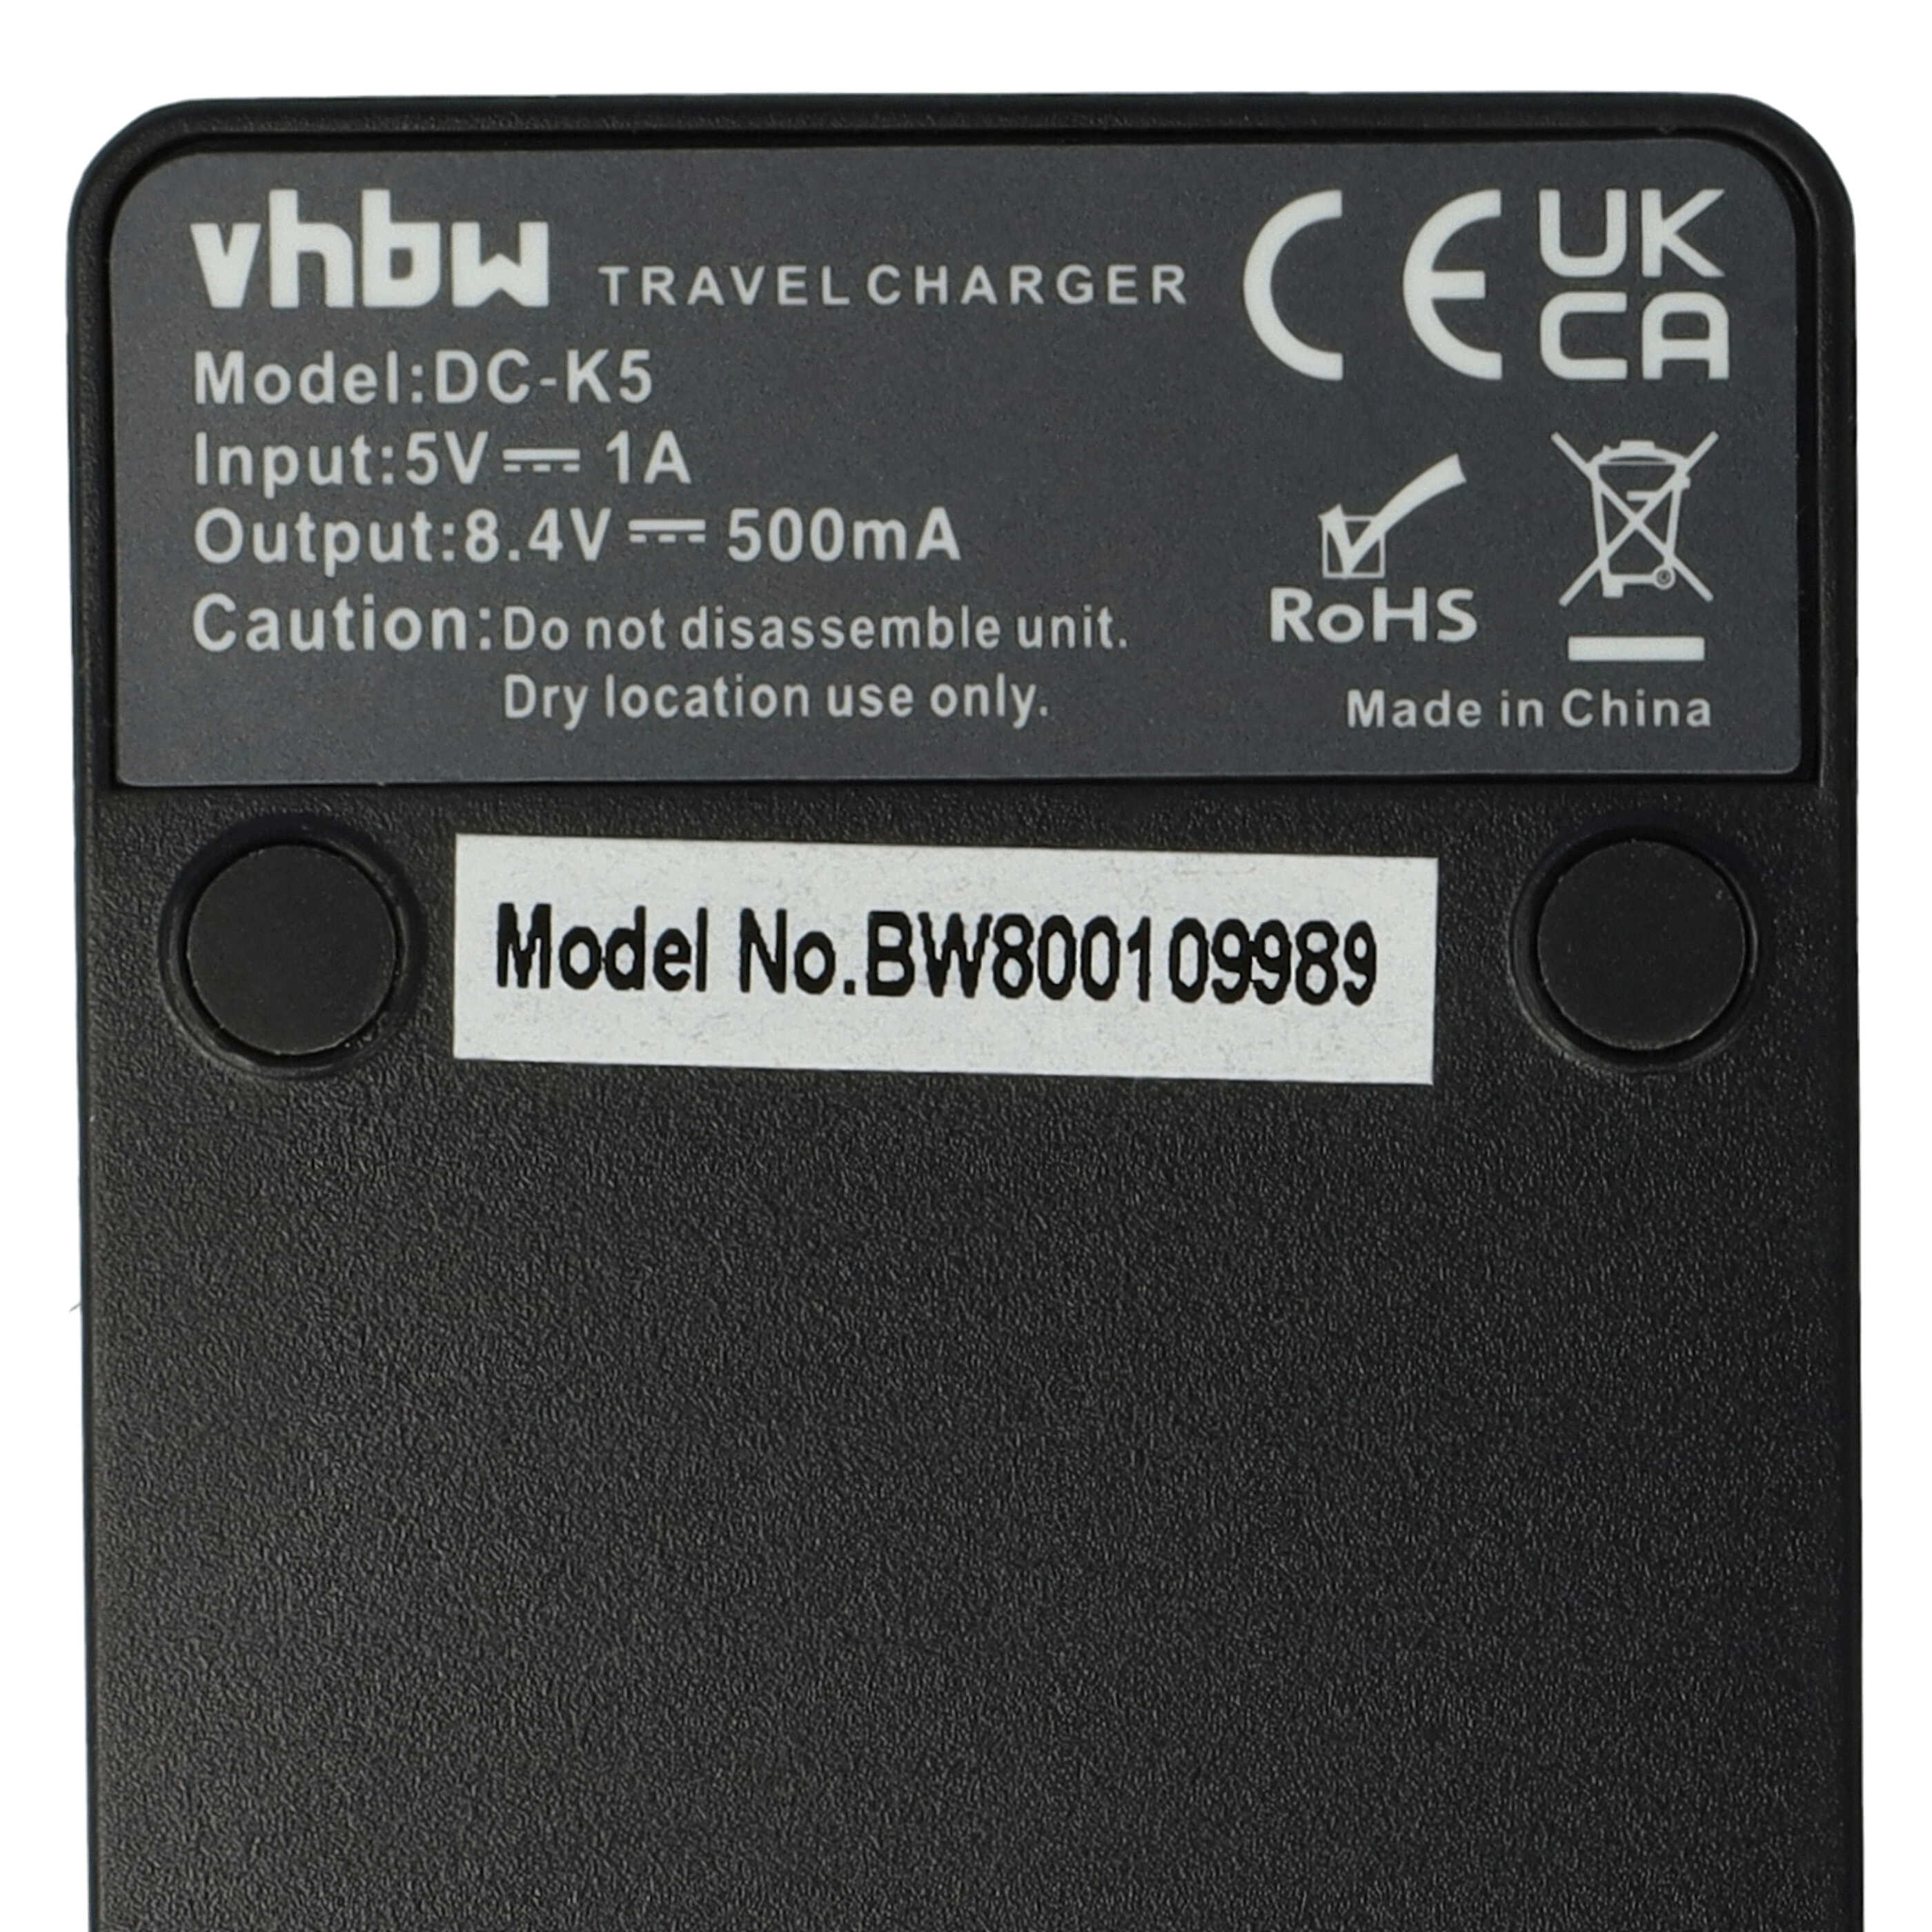 Battery Charger suitable for Lumix DMC-G1 Camera etc. - 0.5 A, 8.4 V